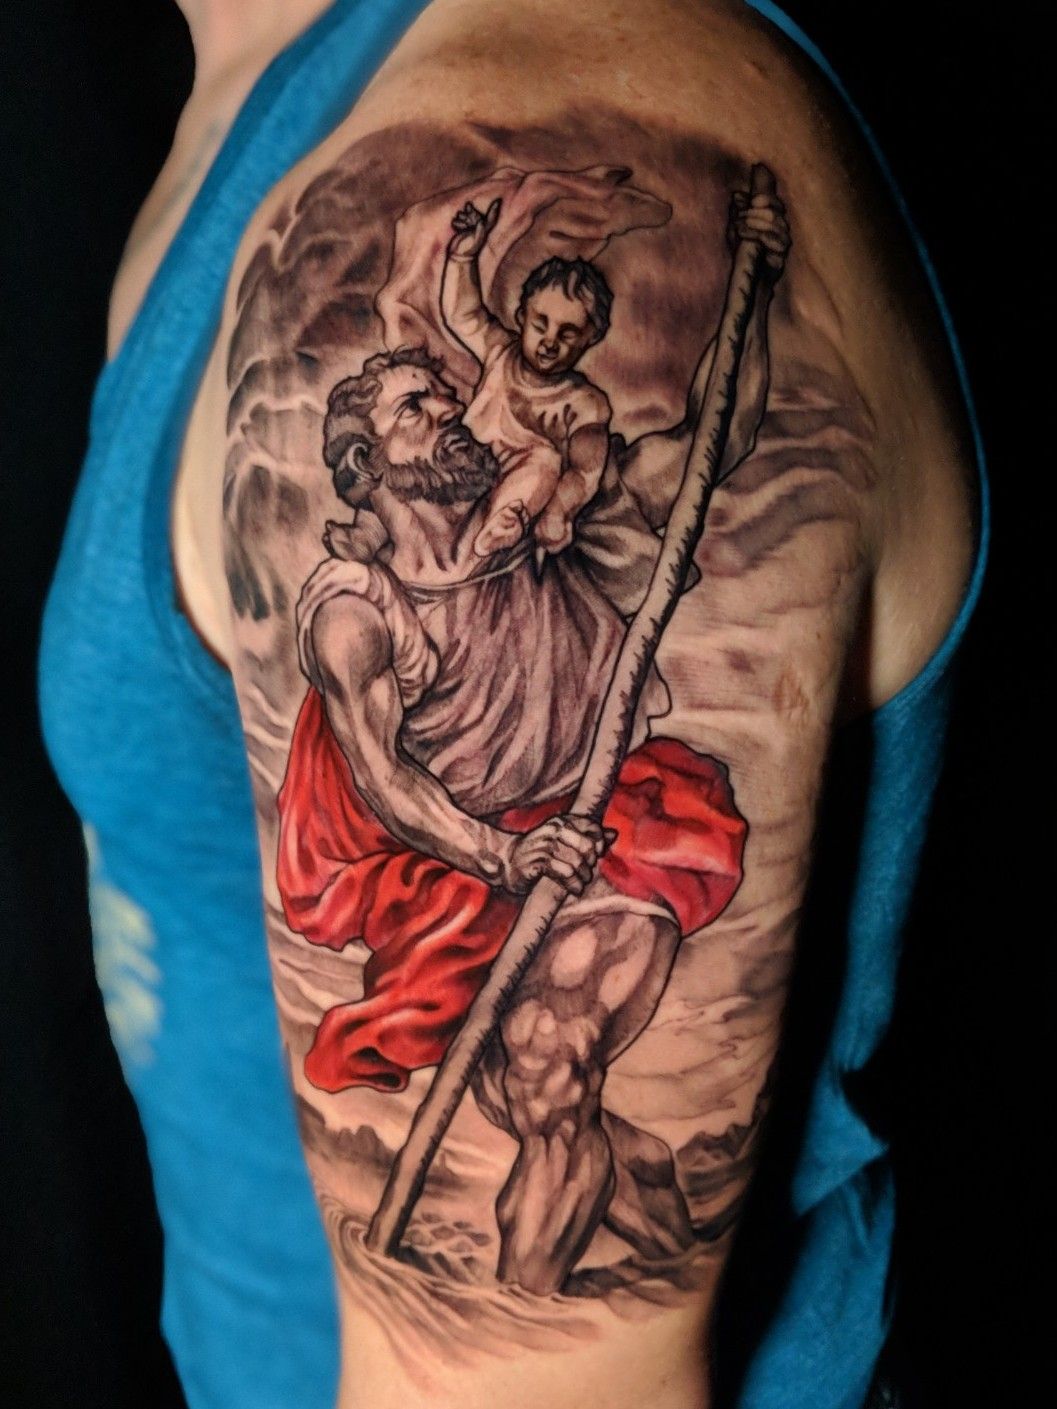 Protection from St Christopher